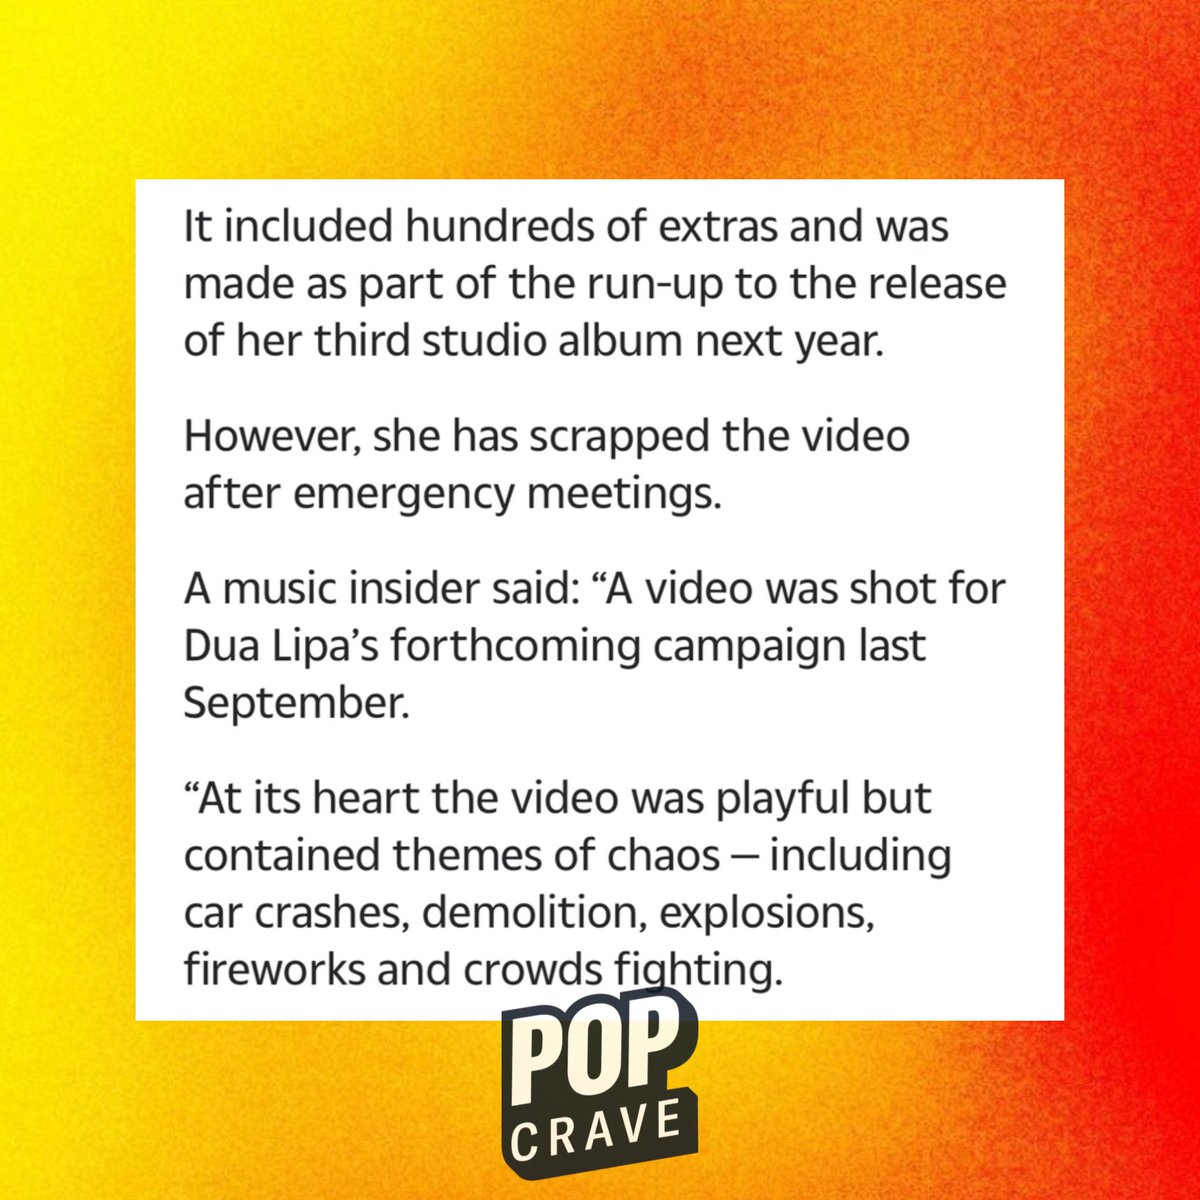 According to The Sun, Dua Lipa scrapped a #DL3 music video featuring “explosions, crowds fighting and chaos.”

Lipa’s team had an “emergency meeting” to pull the video due to the ongoing conflict in Gaza and Israel.